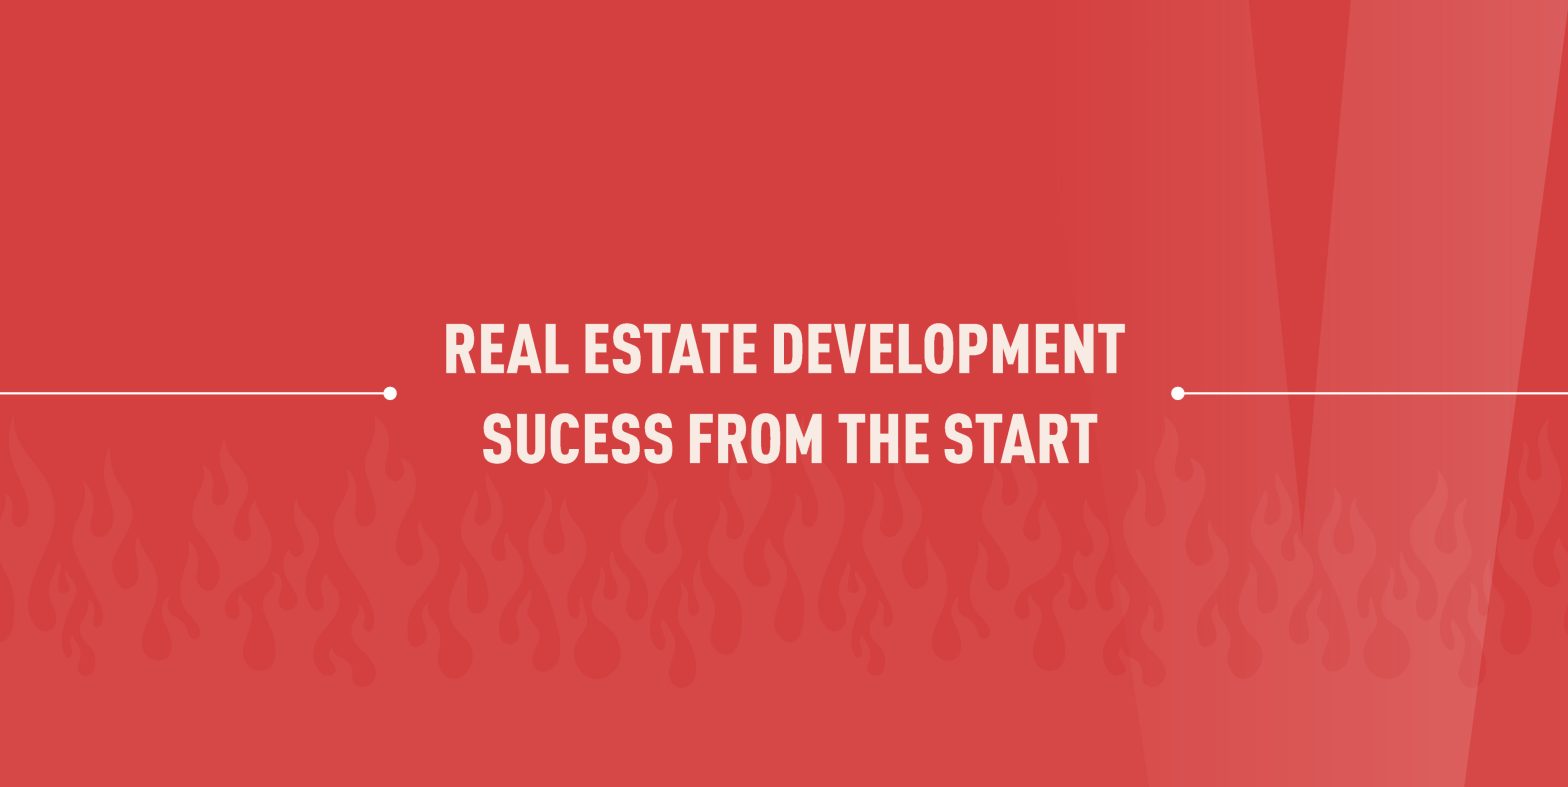 REAL ESTATE DEVELOPMENT – SUCCESS FROM THE START